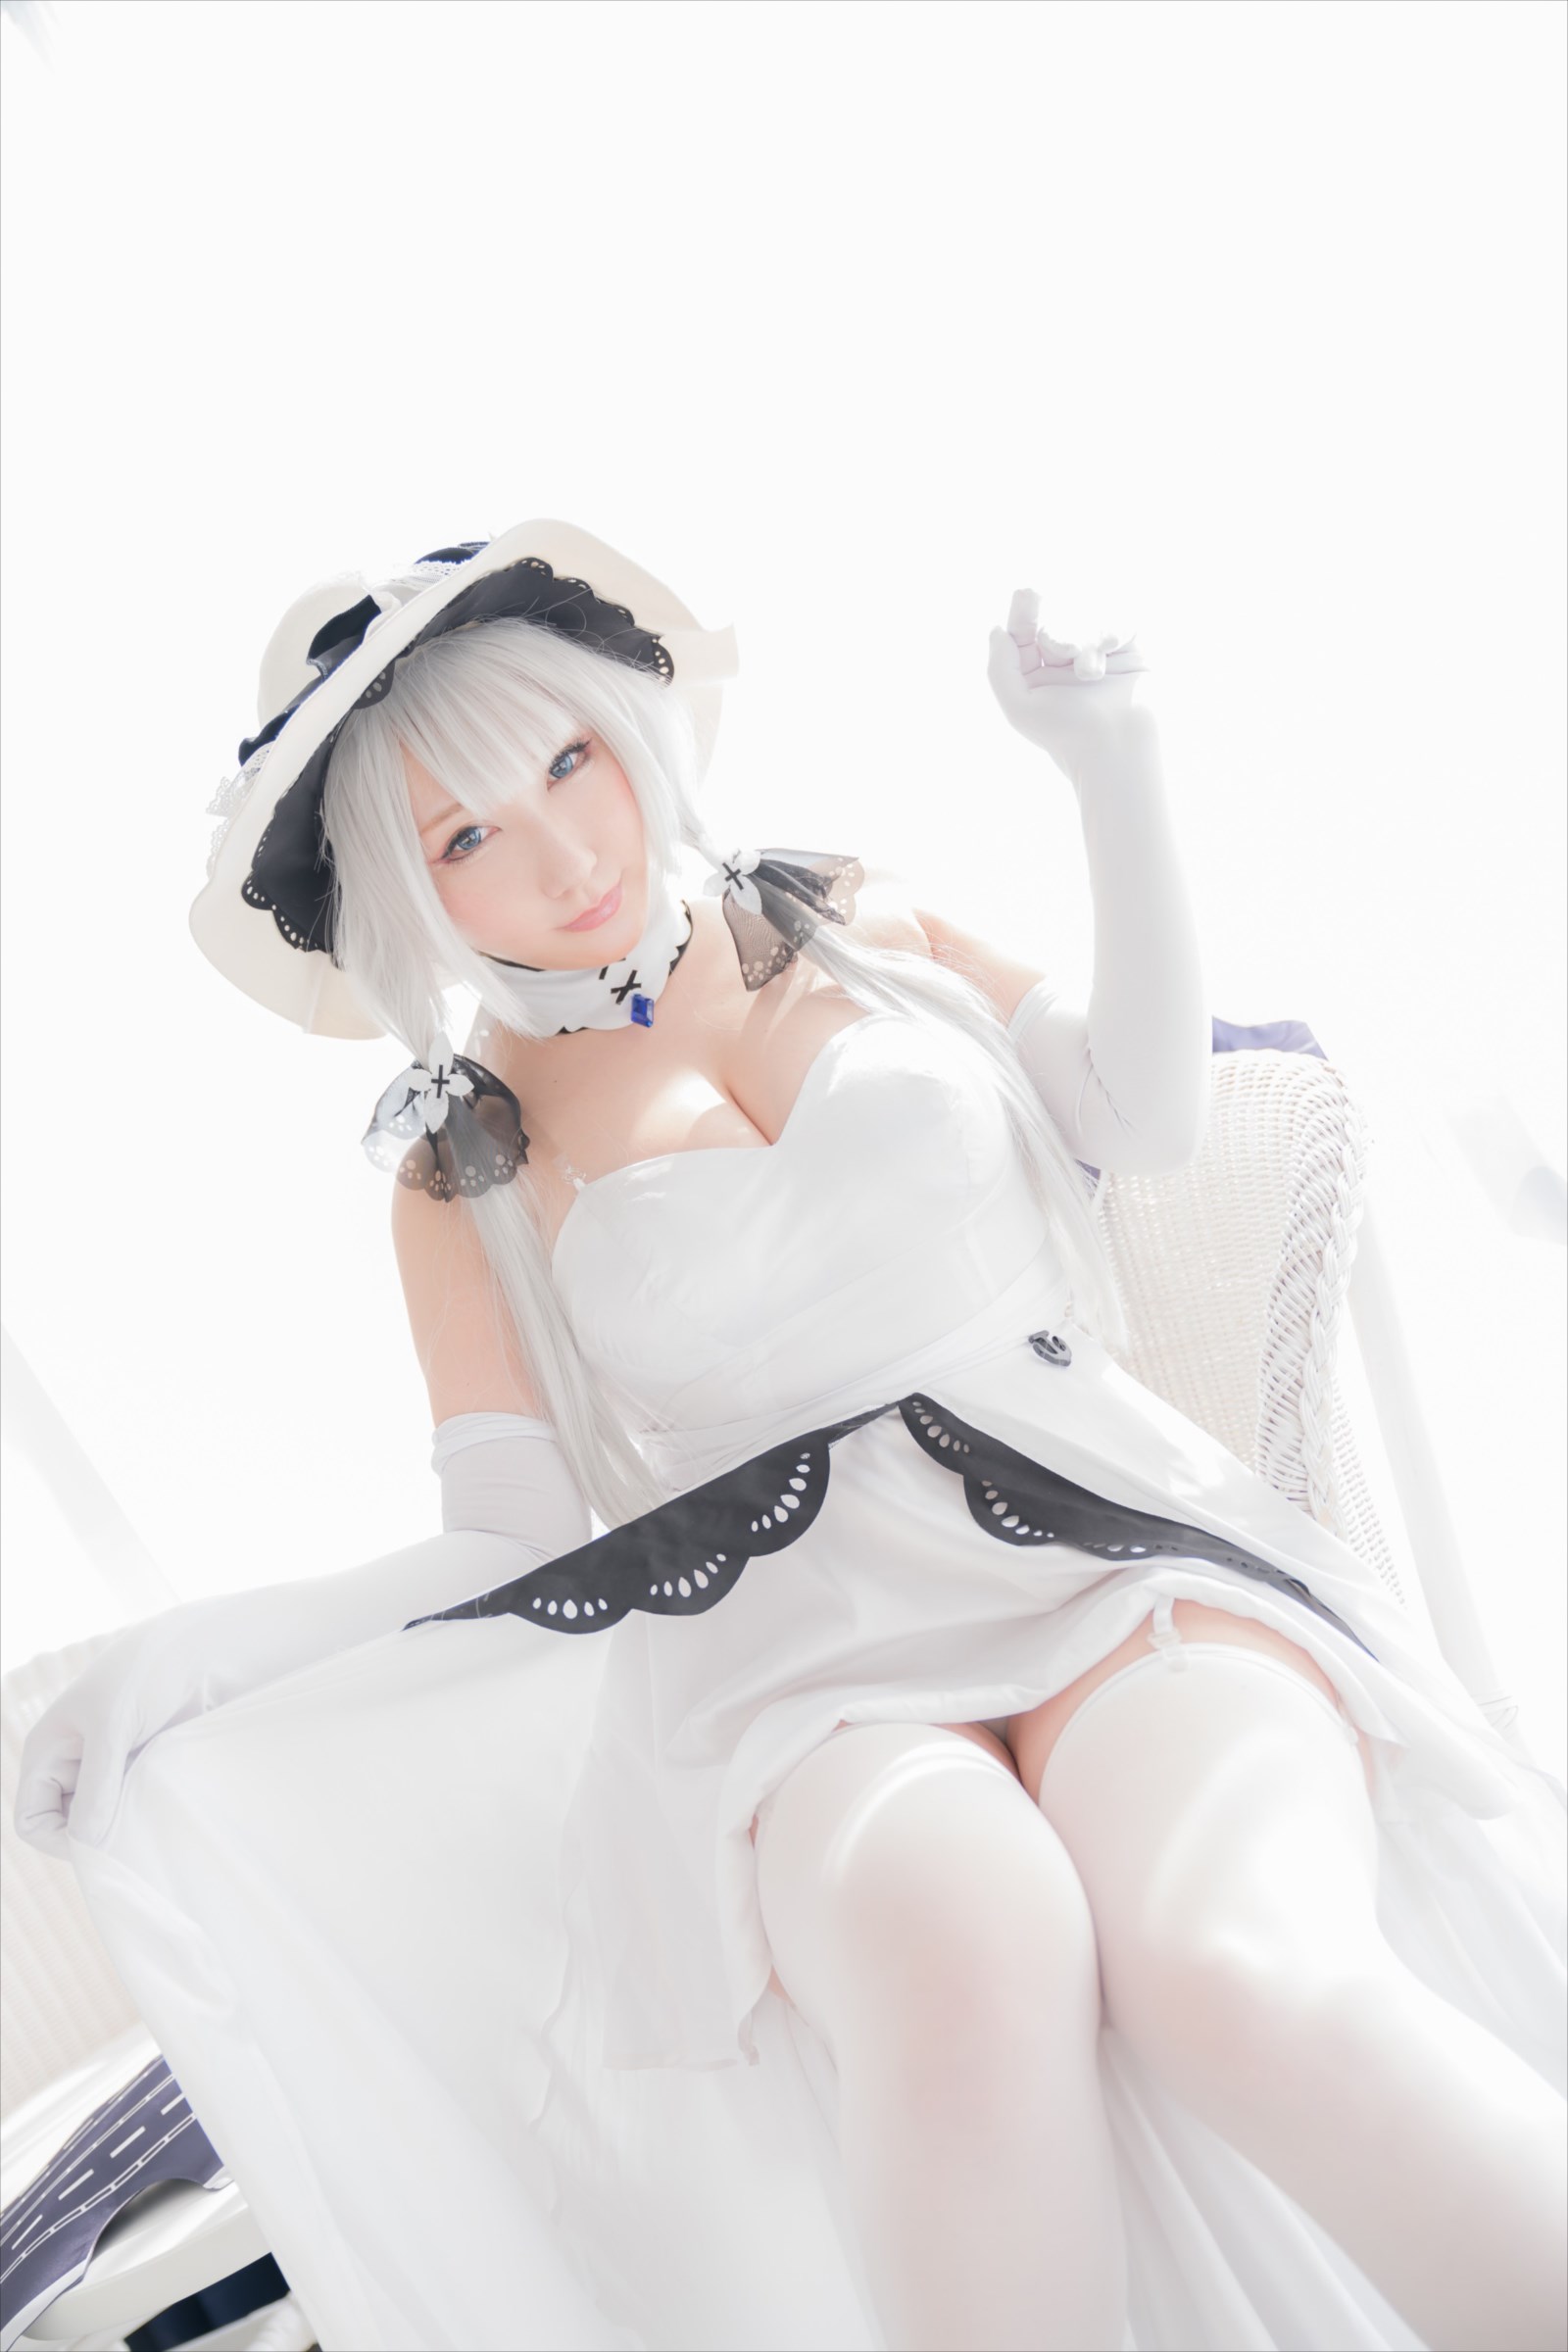 (Cosplay) (C94) Shooting Star (サク) Melty White 221P85MB1(6)